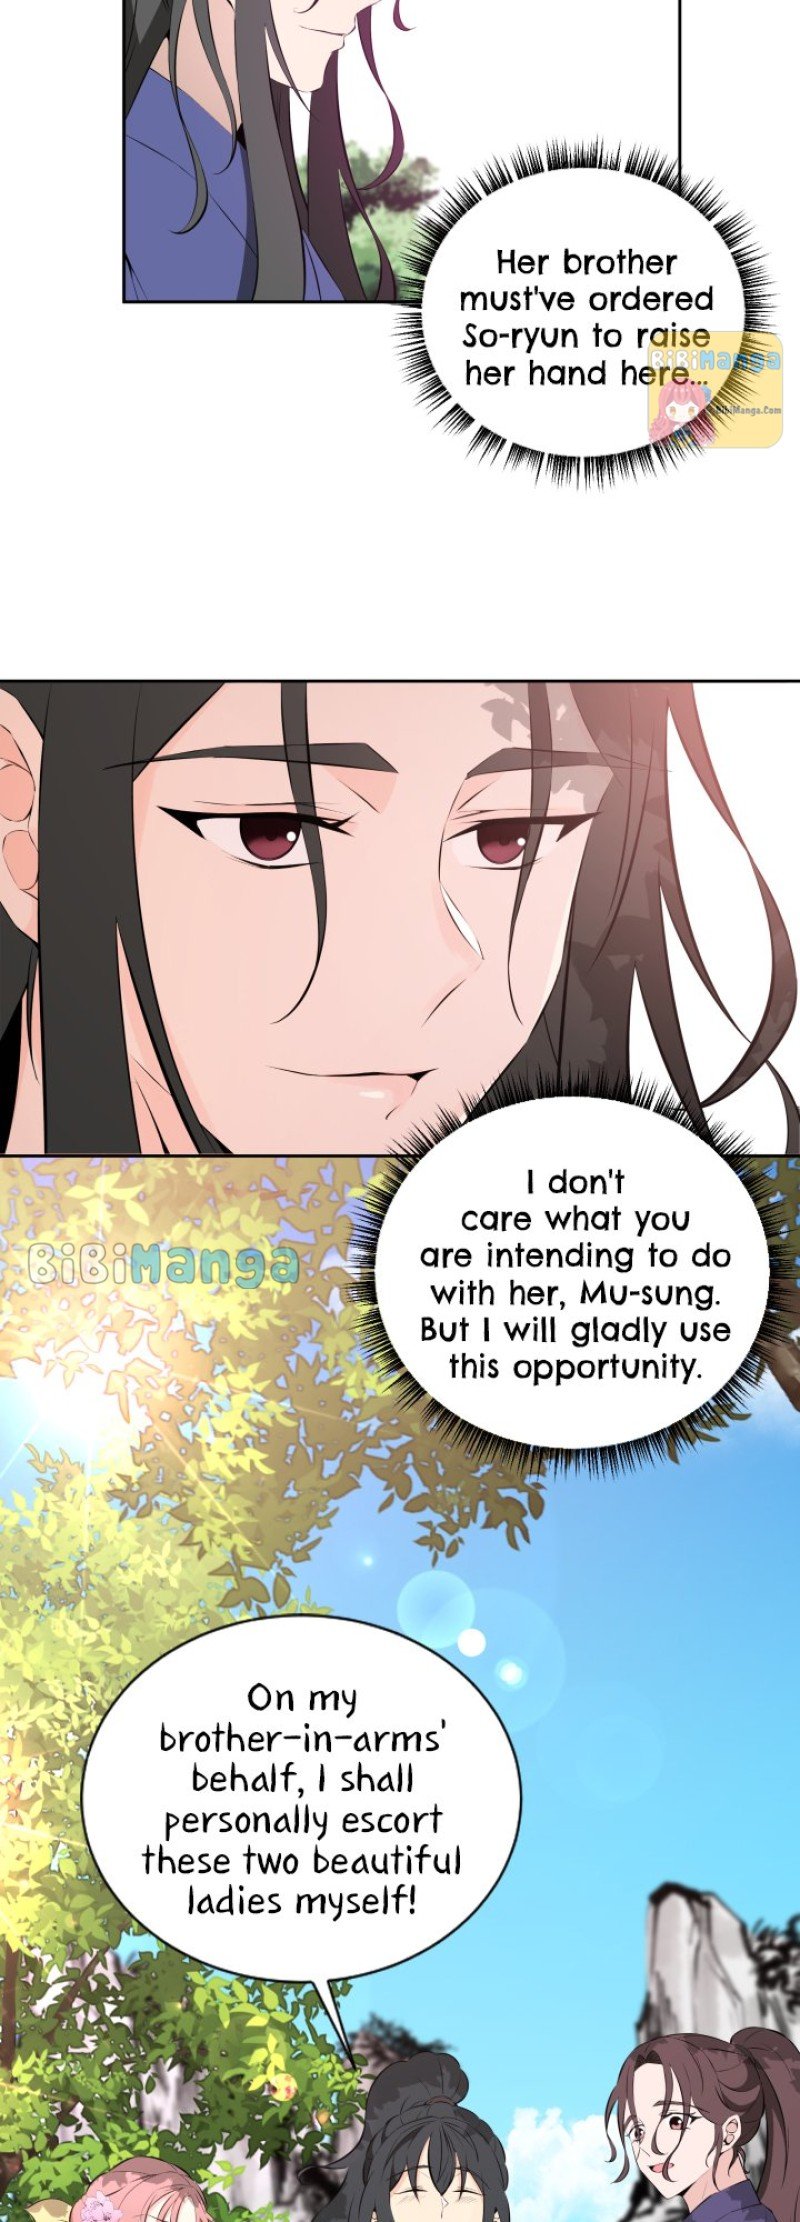 Love and Blade: Girl in Peril chapter 23